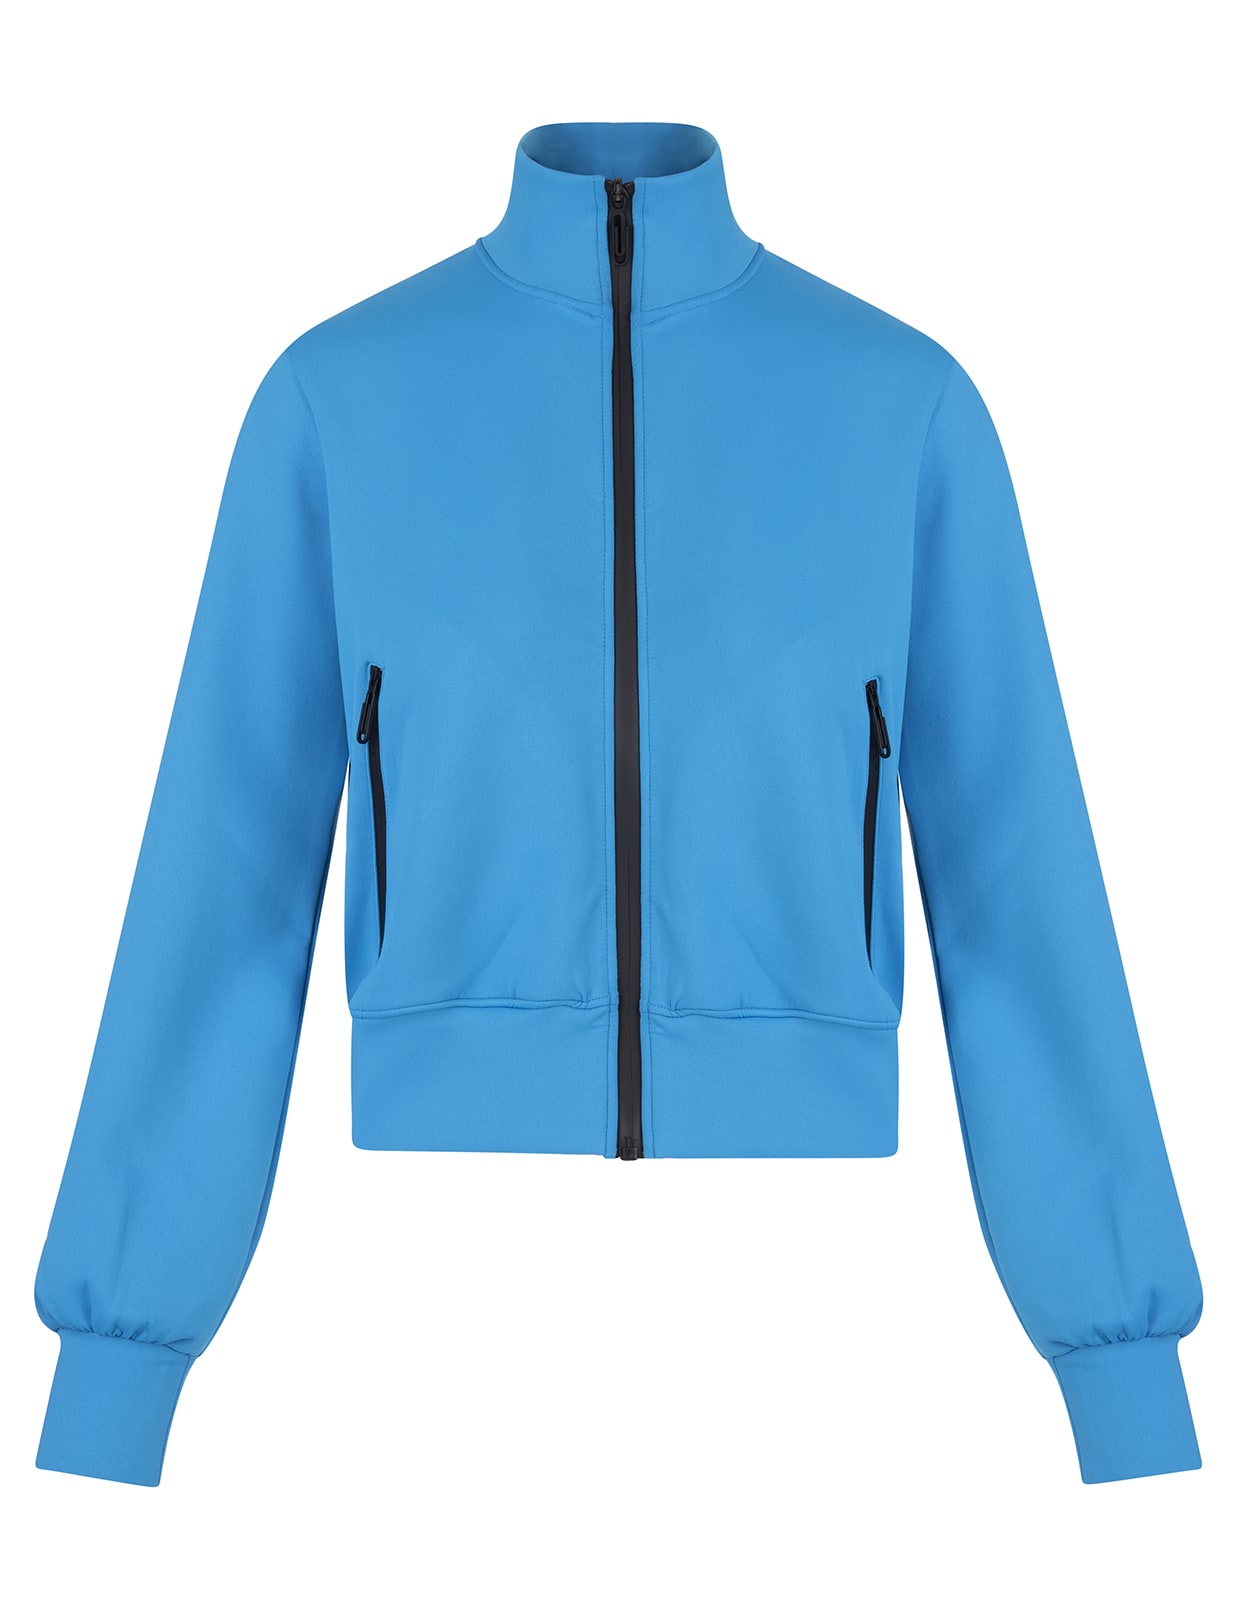 OFF-WHITE WOMAN JACKET IN TURQUOISE TECHNICAL FABRIC WITH LOGO TAPE